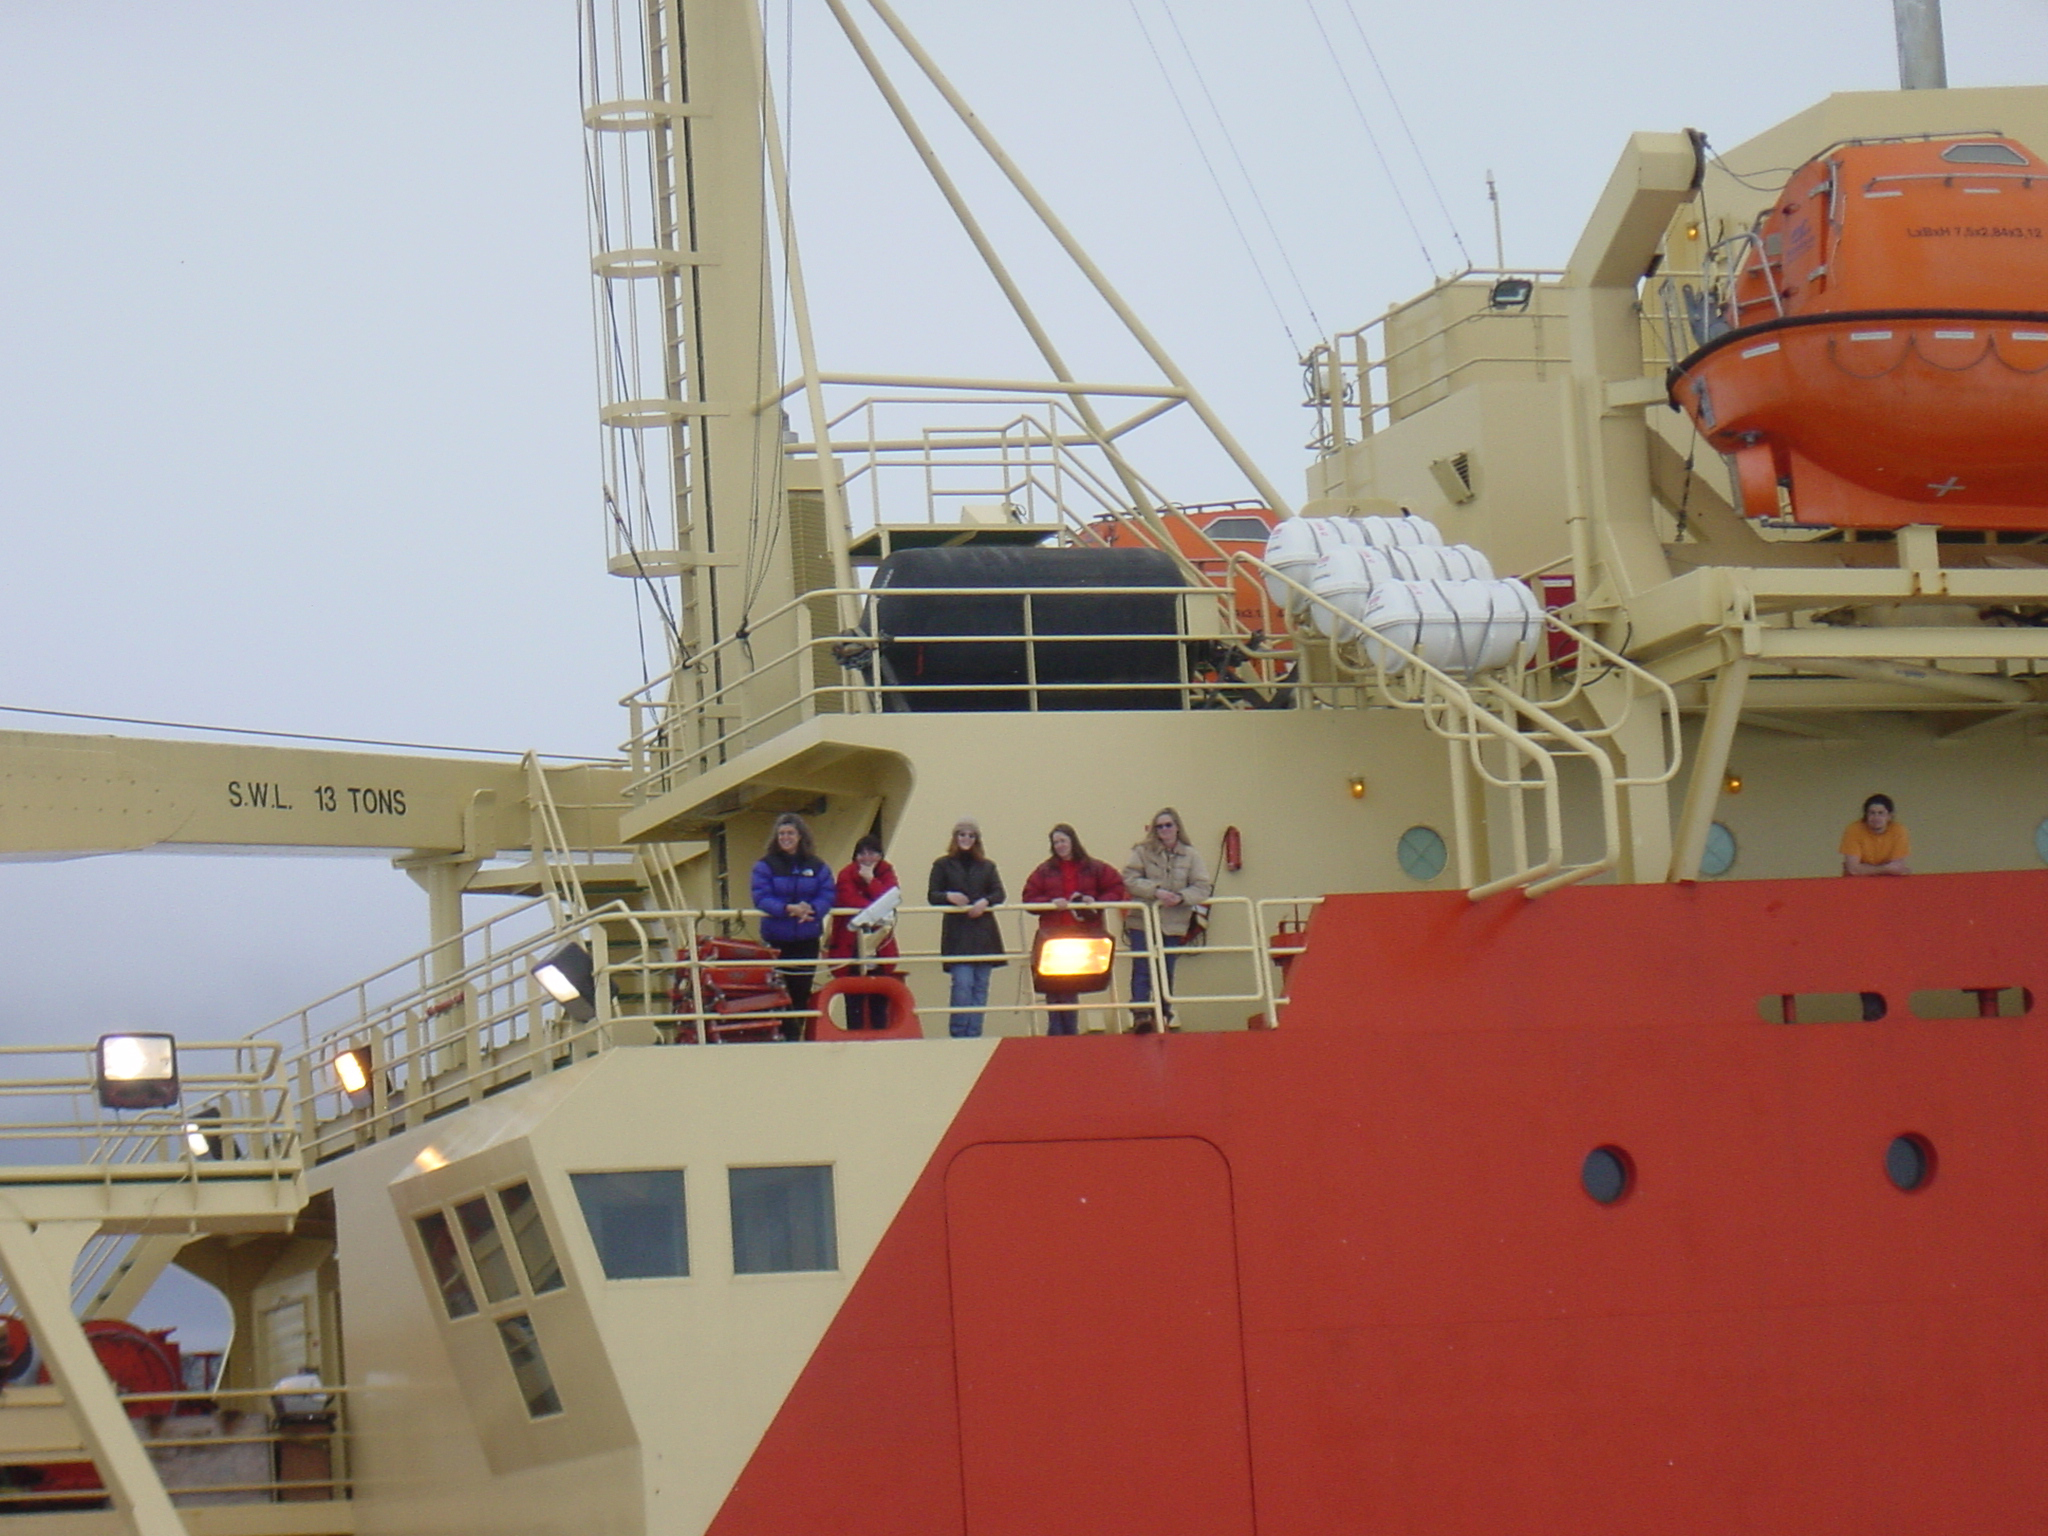 People standing on a ship.